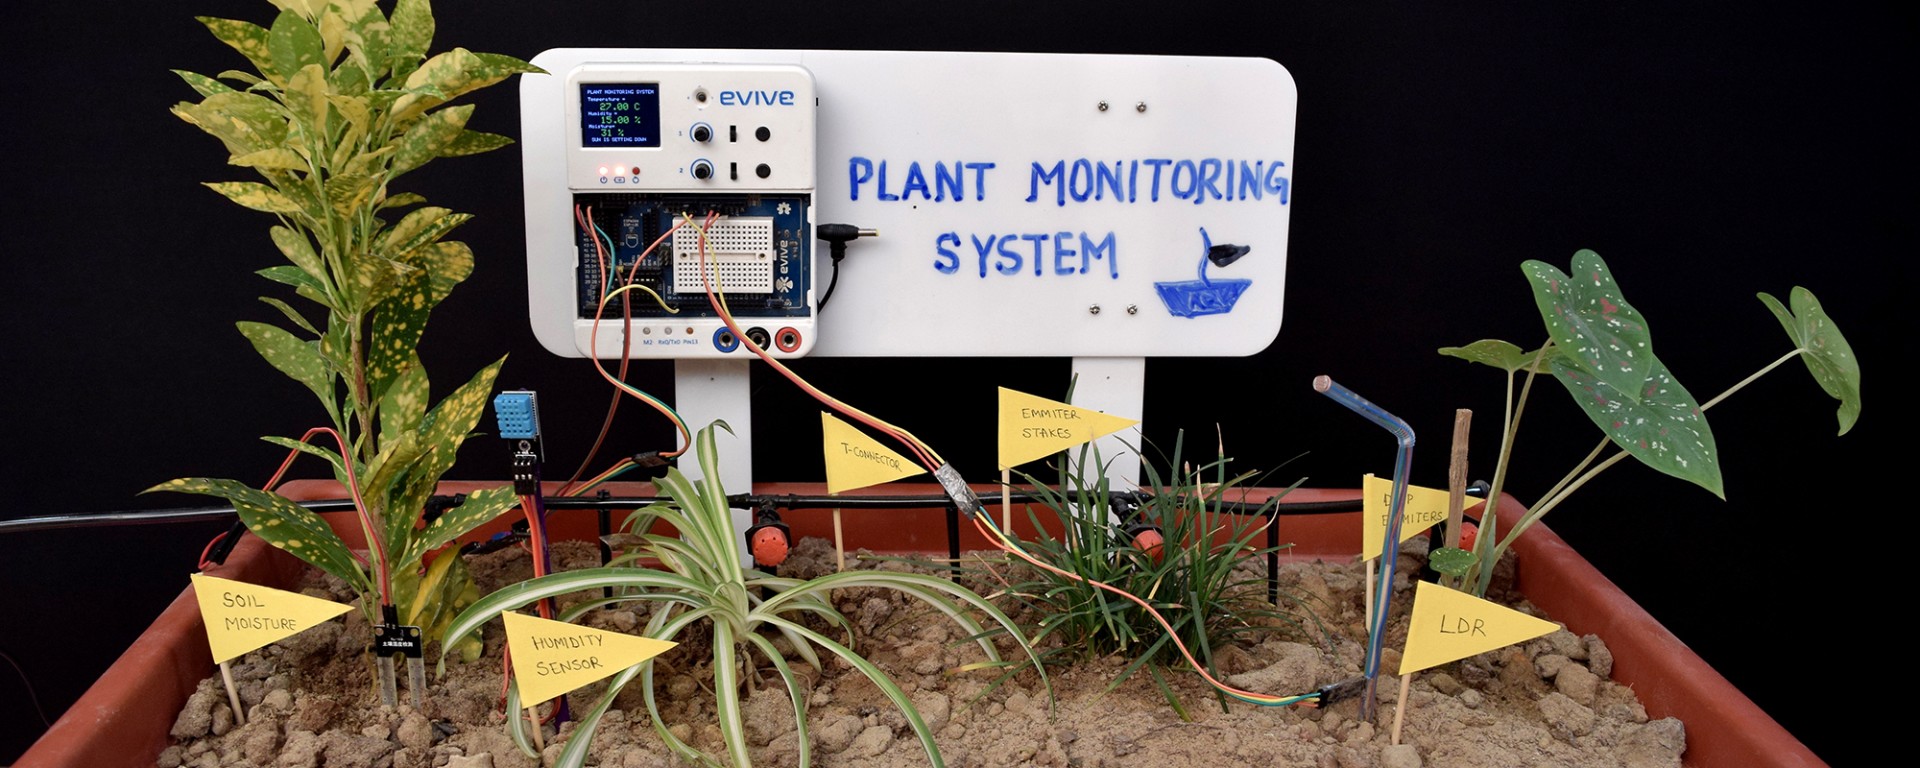 Susteen linned session How to make a DIY Smart Plant Monitoring System using Arduino and IoT